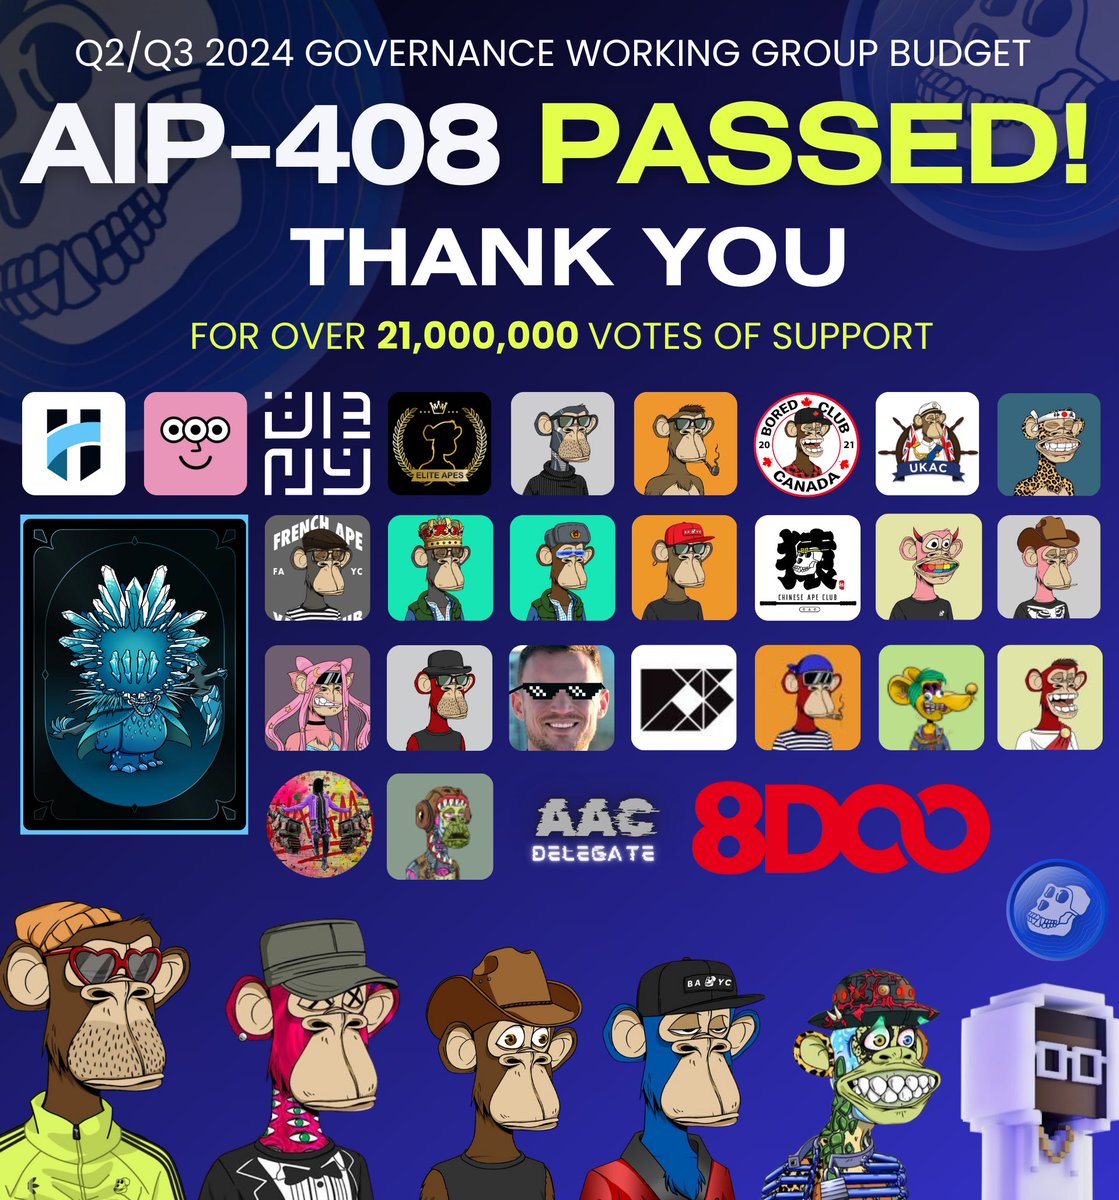 I joined the #ApeCoinDAO Governance Working Group nearly one year ago with a progressive vision and the goal to drive more value back into the @apecoin ecosystem, which we achieved. Now because of you — we get to do again 🦍🦍 THANK YOU FOR YOUR SUPPORT. #ApeCoinGWG #ApeChain